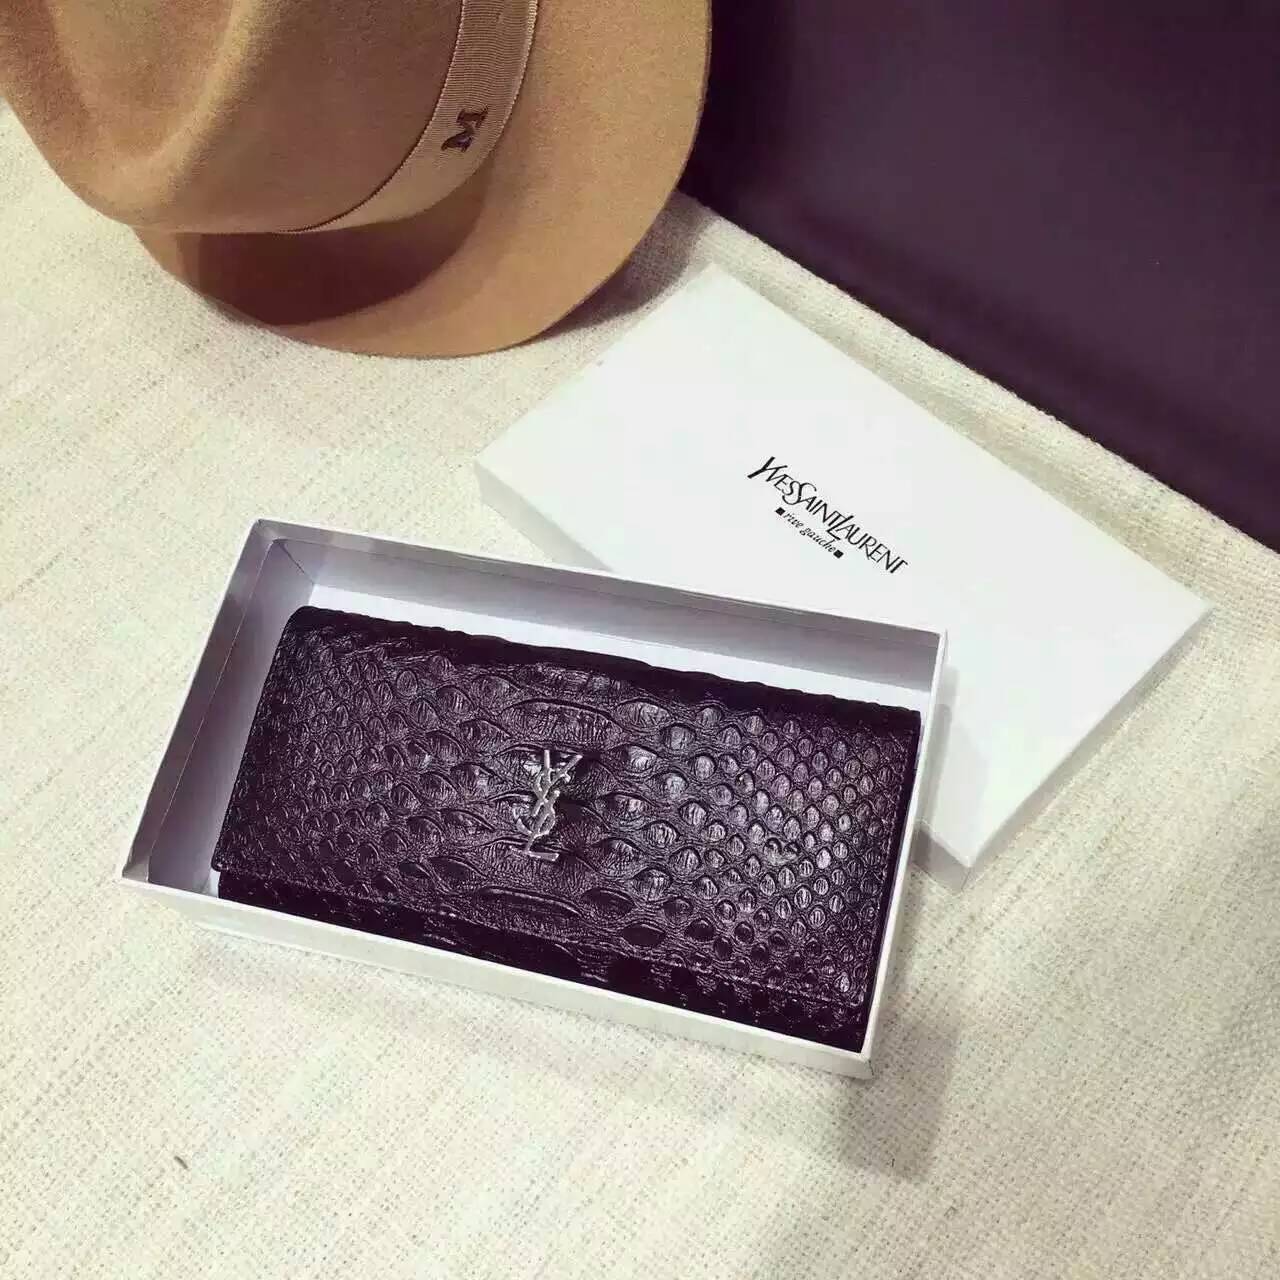 Limited Edition!2016 New Saint Laurent Small Leather Goods Cheap Sale-Saint Laurent Clutch in Black Python Embossed Leather